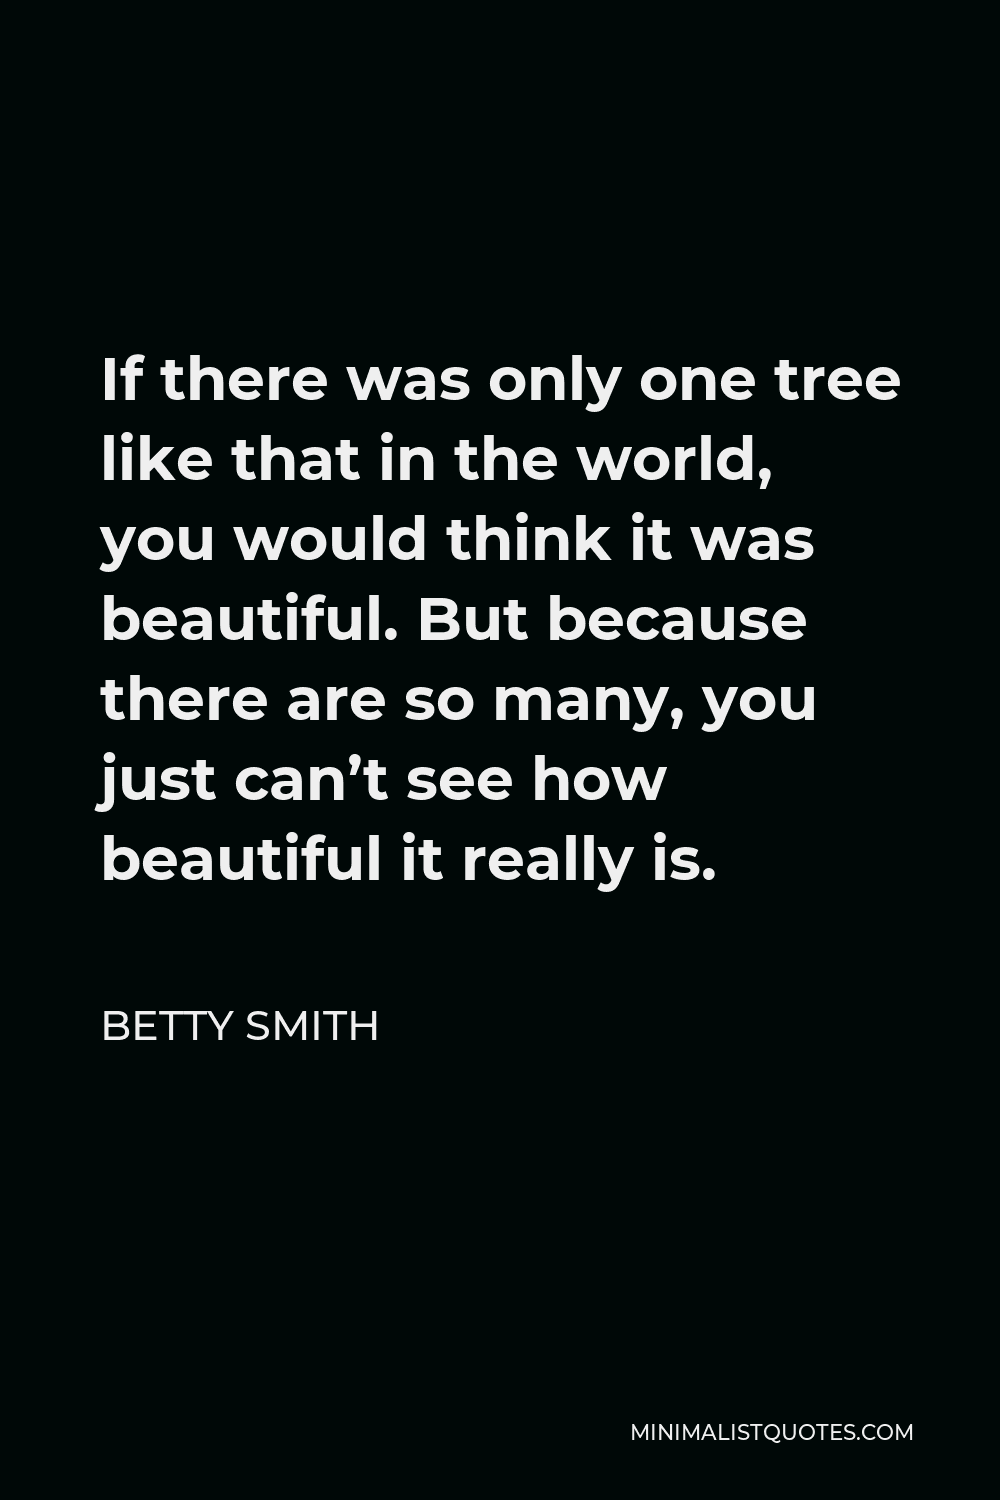 Betty Smith Quote - If there was only one tree like that in the world, you would think it was beautiful. But because there are so many, you just can’t see how beautiful it really is.